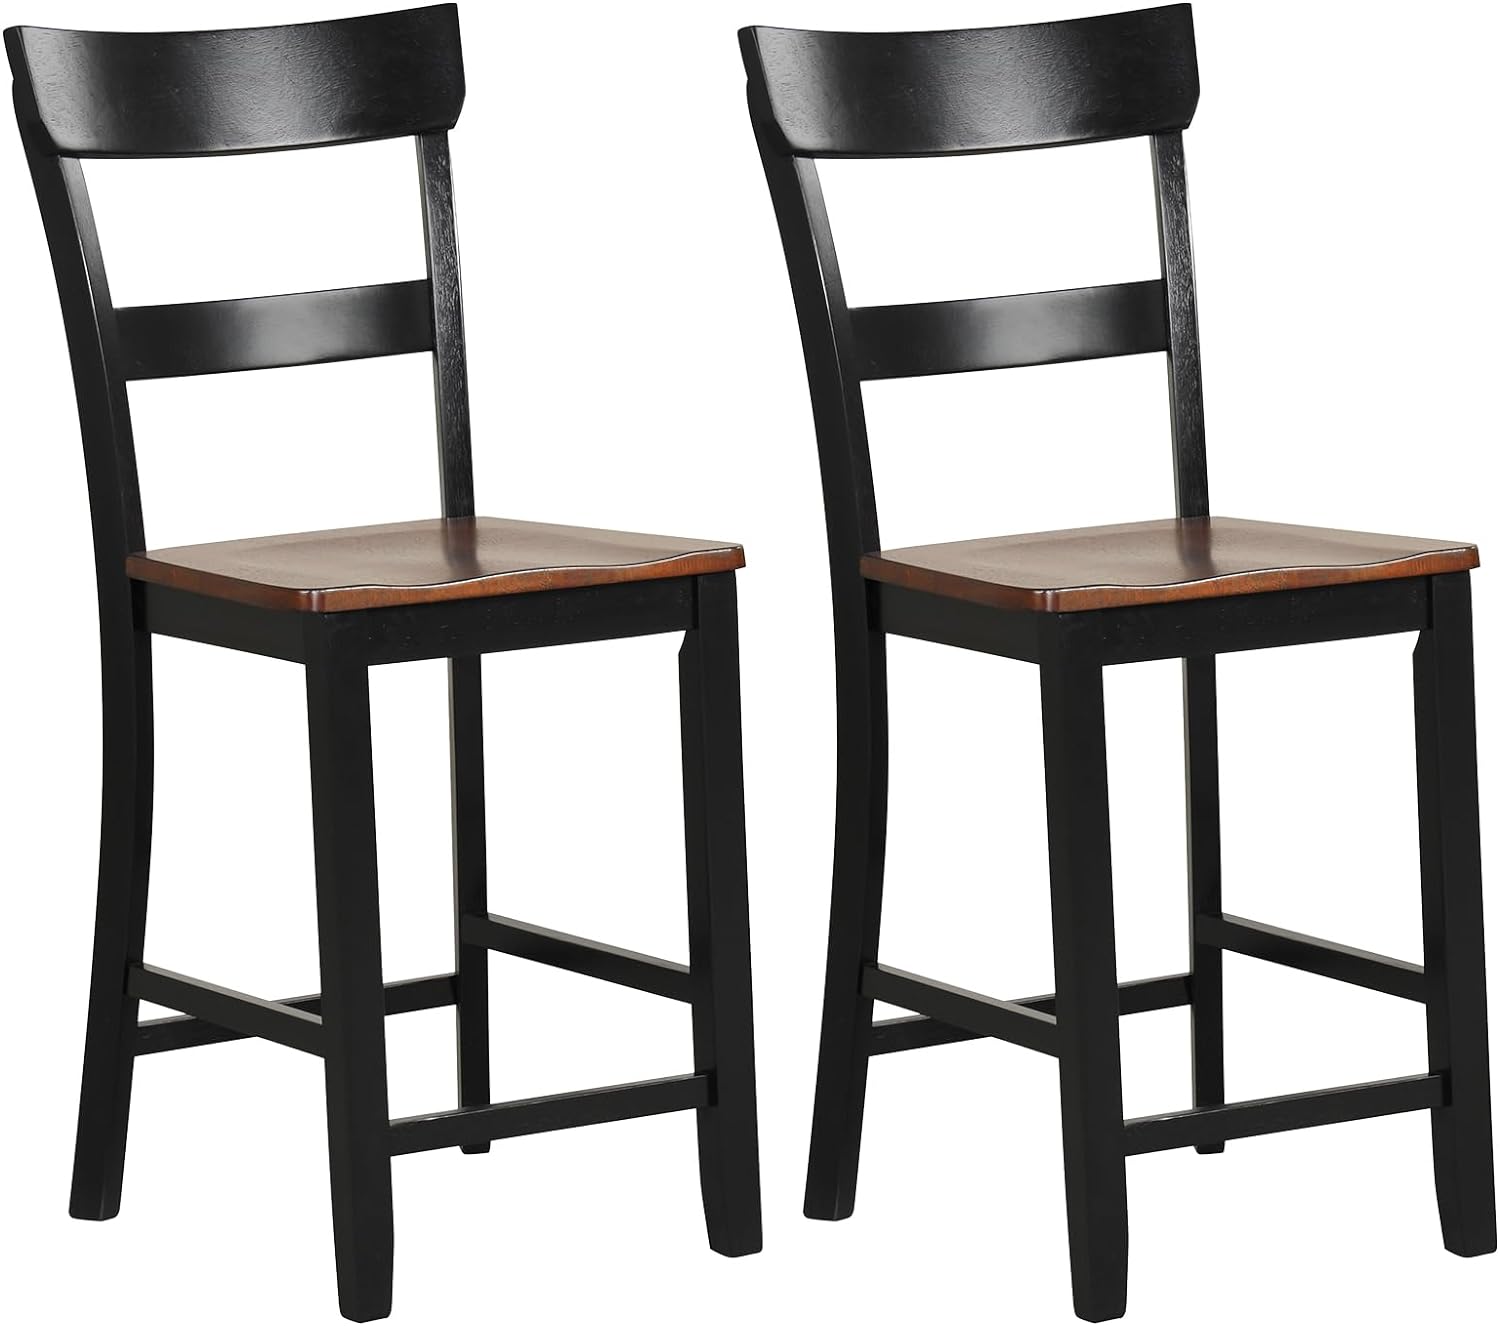 Giantex Wooden Bar Stools Counter Height Set of 2, 24.5" Farmhouse Wood Bar Dining Chairs